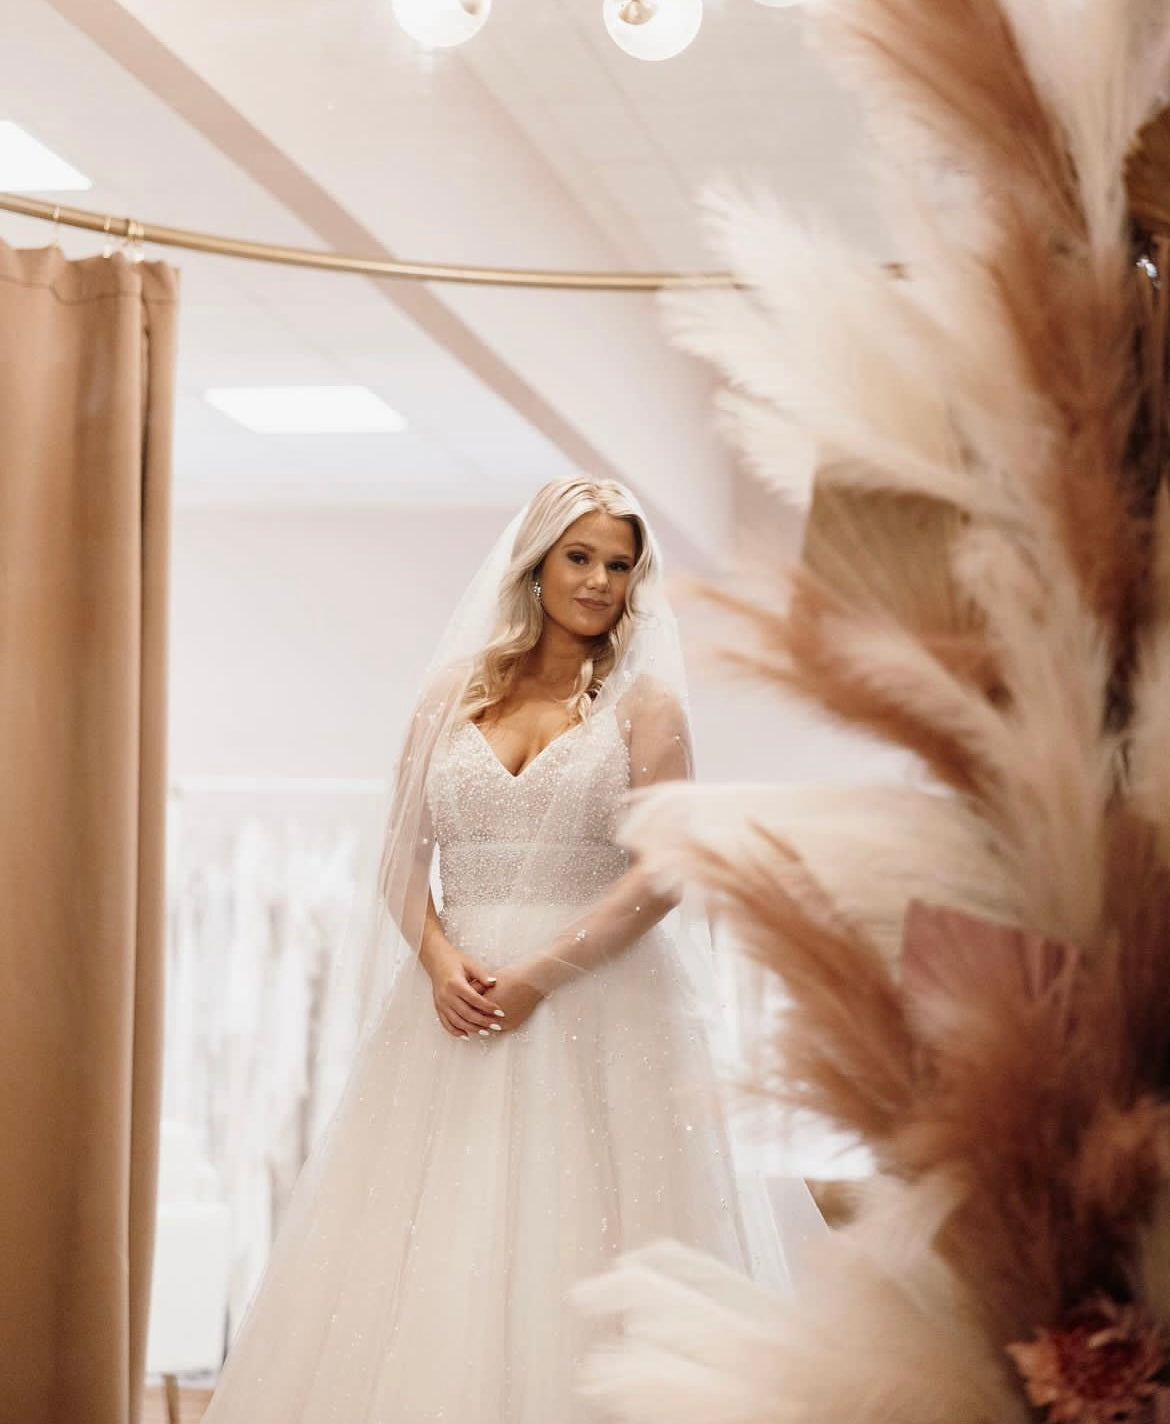 Maskara – high-end wedding dress in pearls and tulle